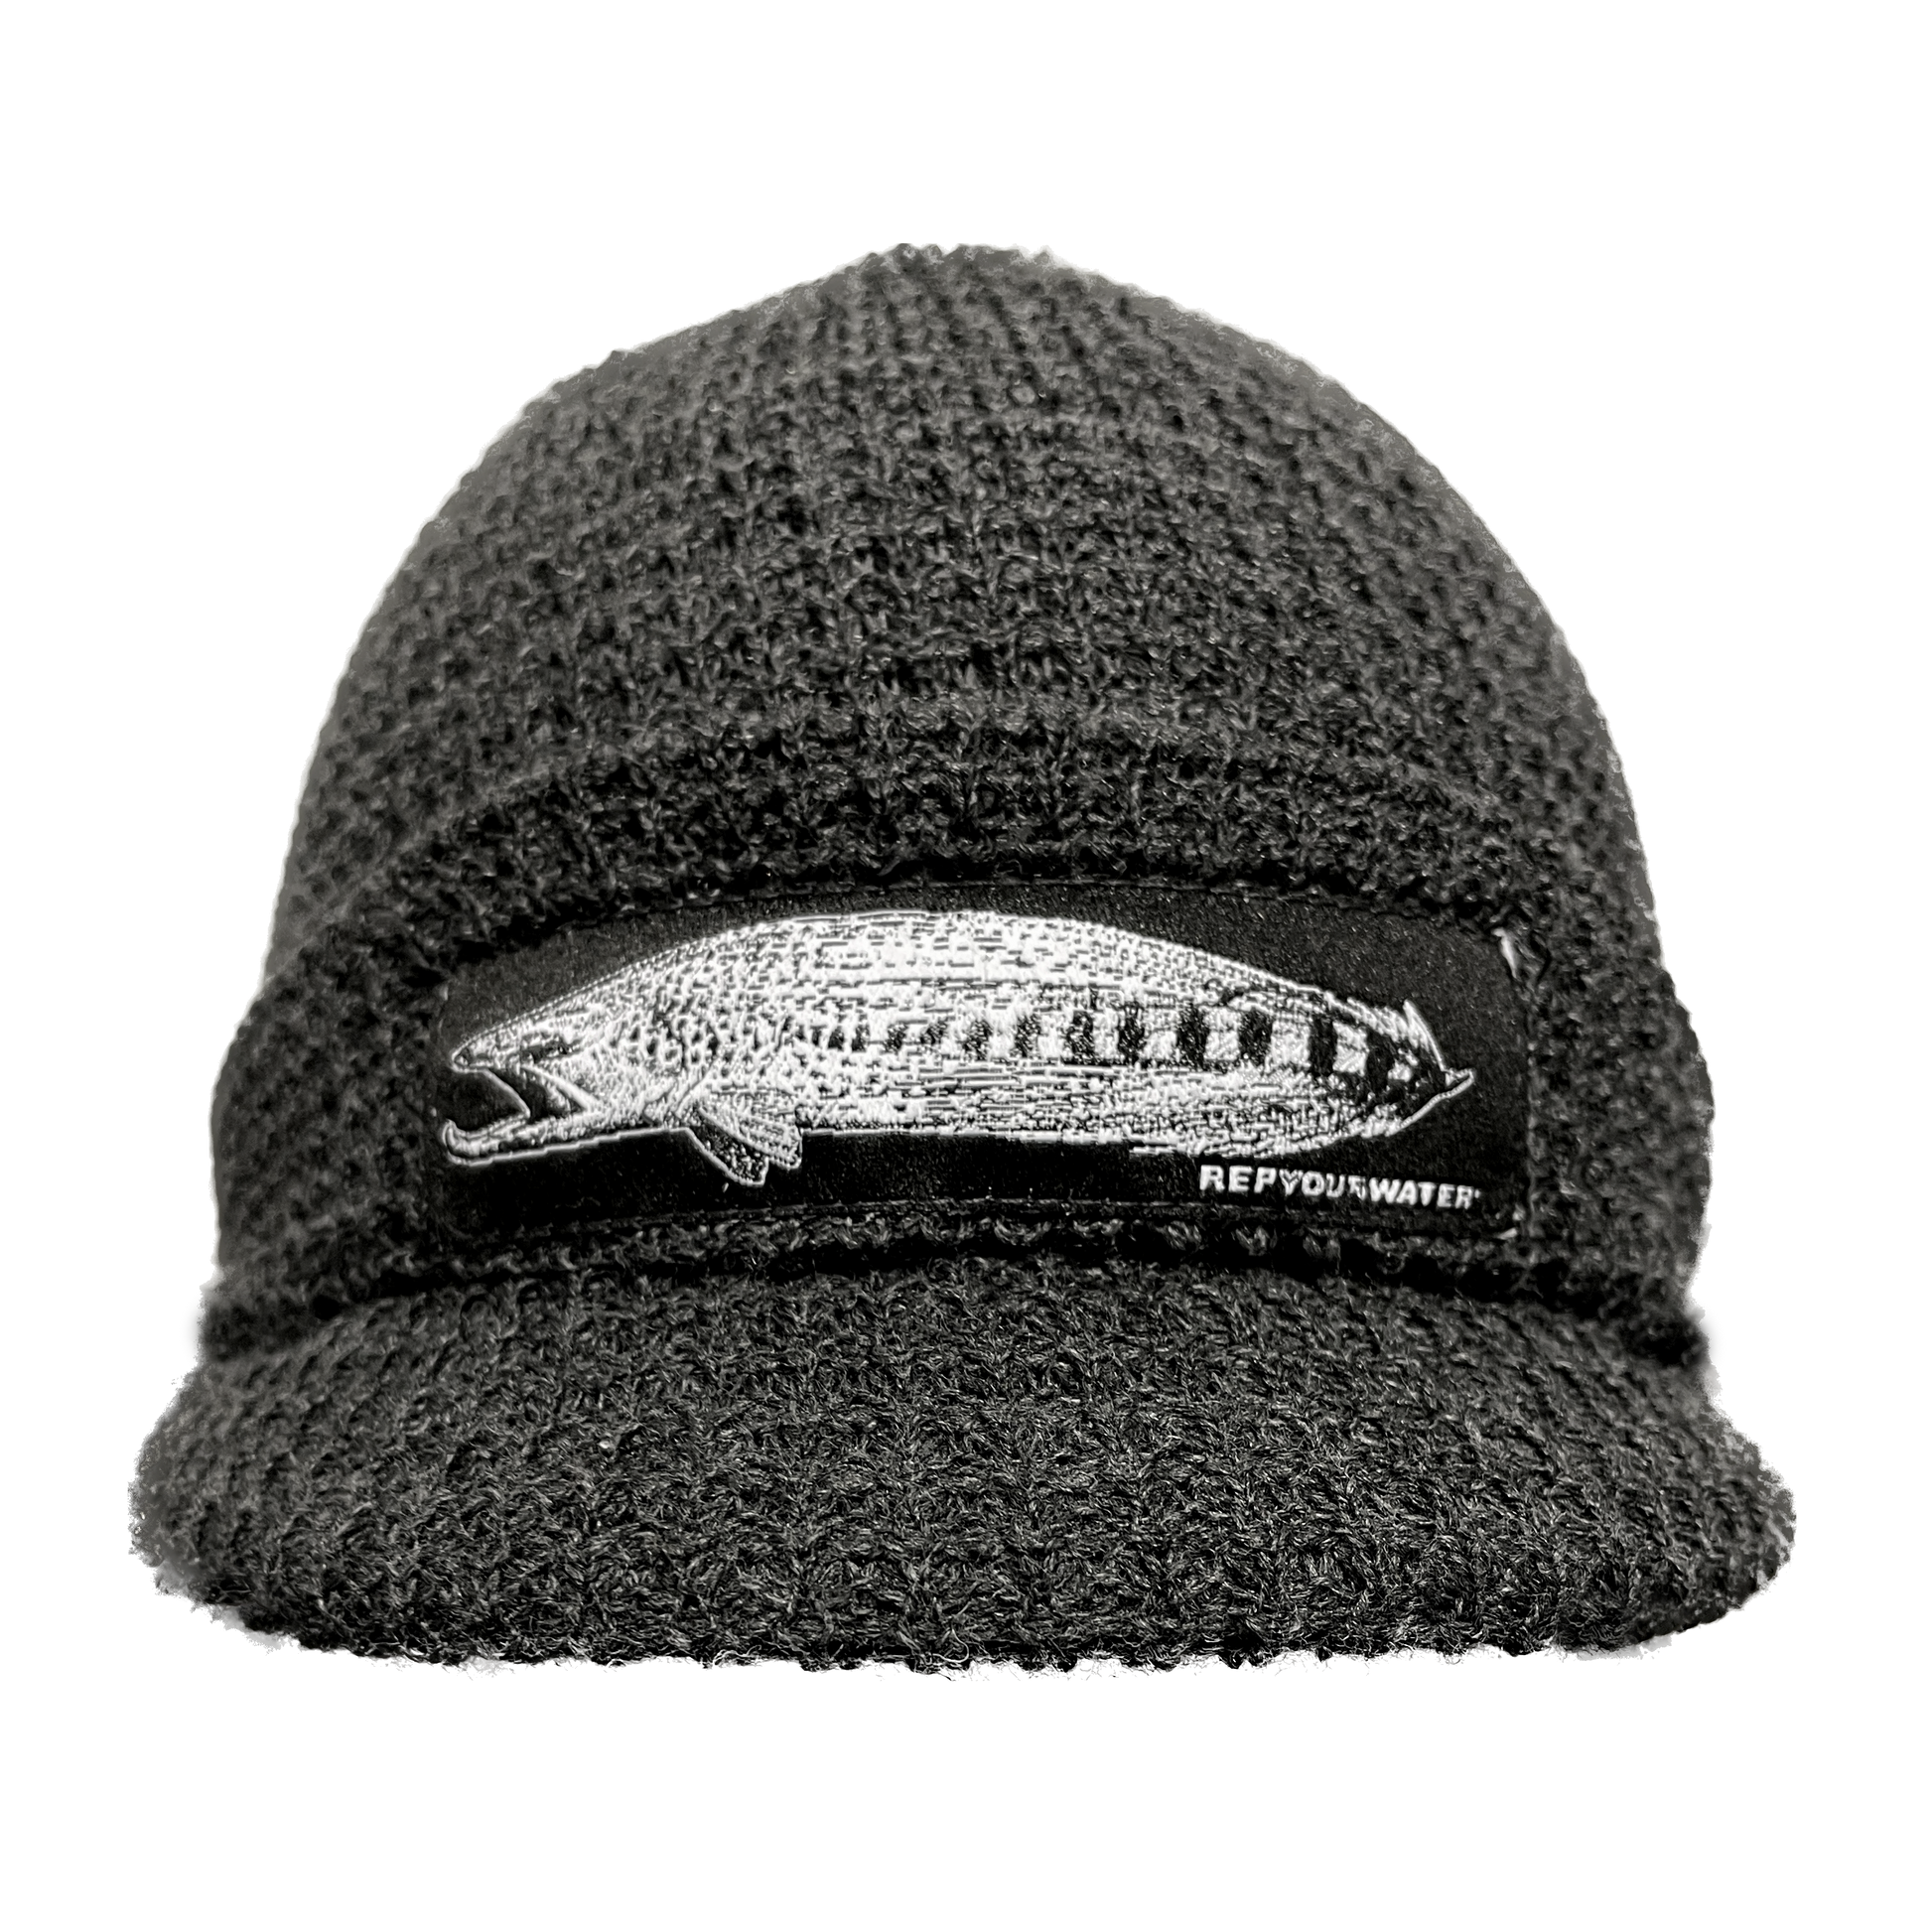 A dark gray winter hat with a cuff and a long rectangular patch on the cuff with a brown trout morphing into a streamer fly. Hat also has a small bill in the front of the same material